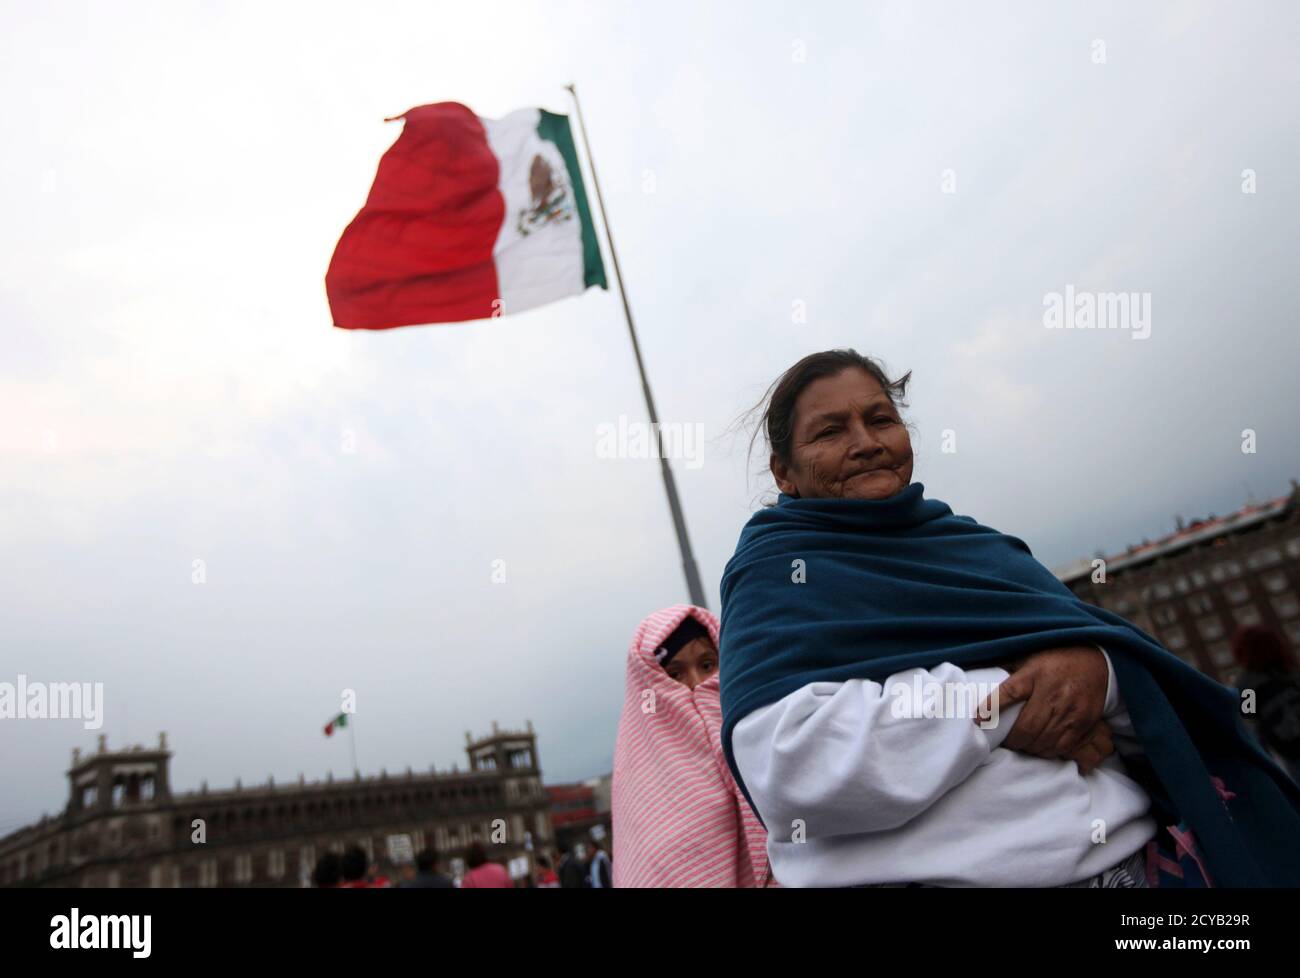 A woman and a girl stand near a Mexican flag during a protest march in Mexico City January 31, 2012. Thousands of protesters and union workers took to the streets in a march called 'Movement for Food and Energy Sovereignty, Worker's Rights and Democratic Freedom', to protest about economic issues affecting them such as unemployment and the ongoing drought causing severe shortage of food and water. REUTERS/Edgard Garrido (MEXICO - Tags: POLITICS CIVIL UNREST BUSINESS) Stock Photo